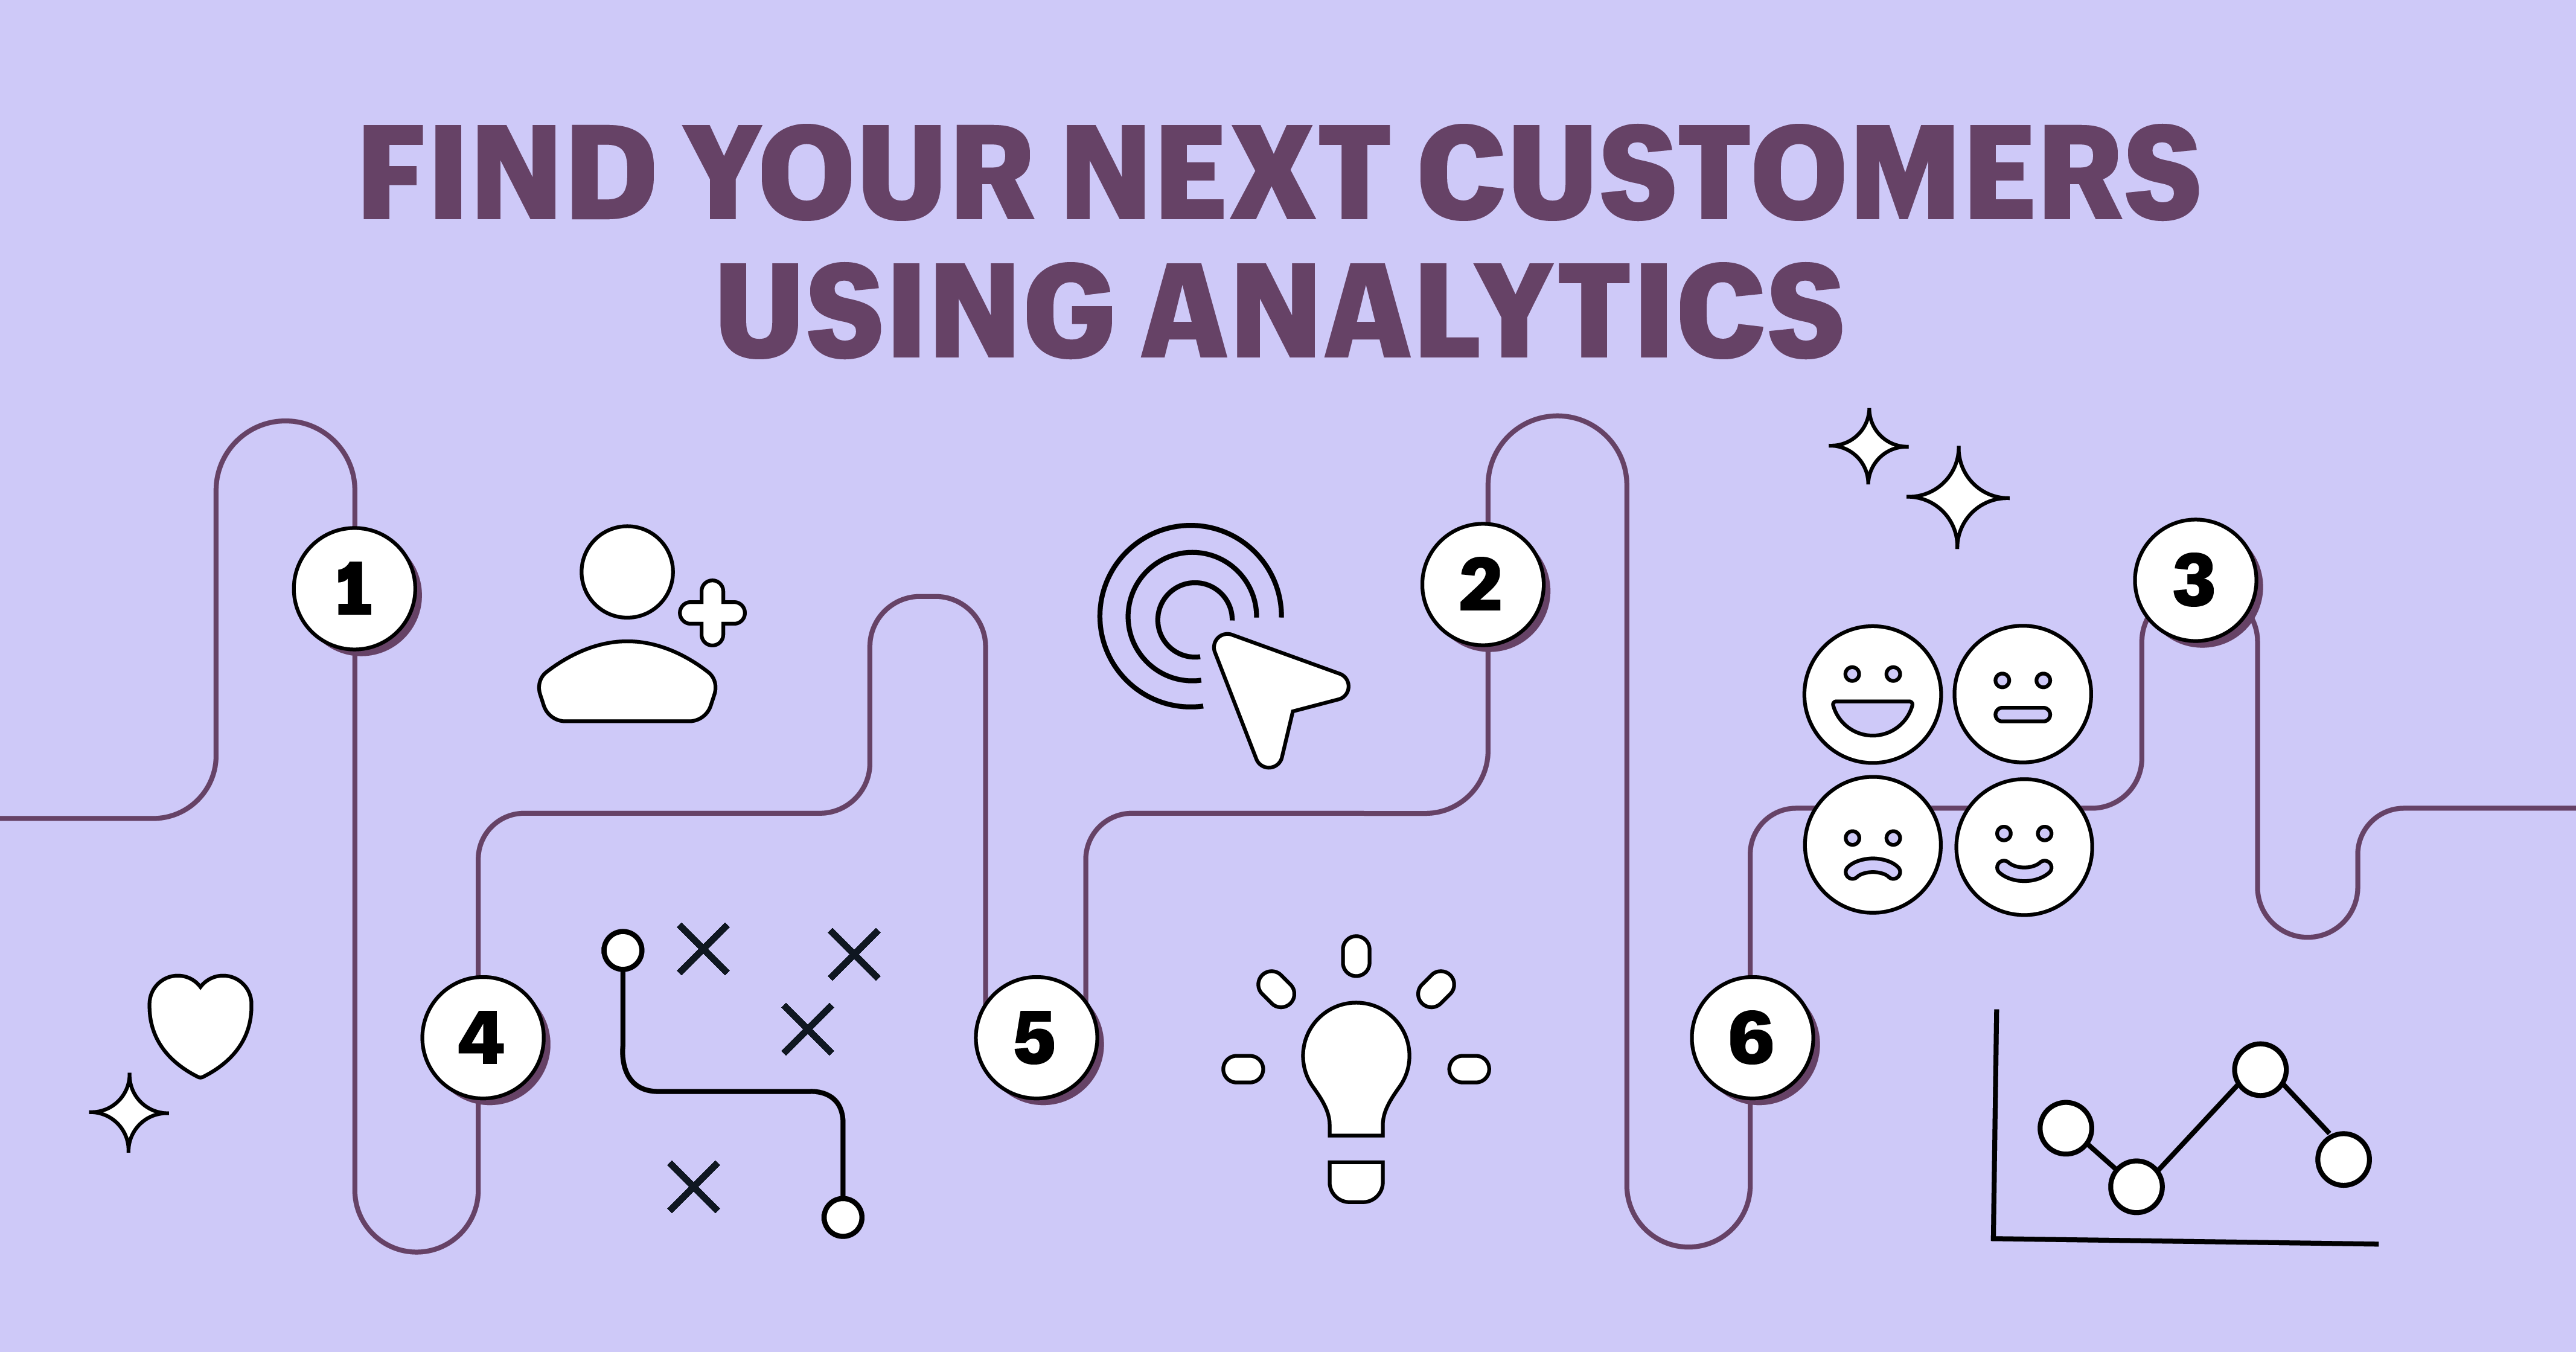 Use analytics to find customers